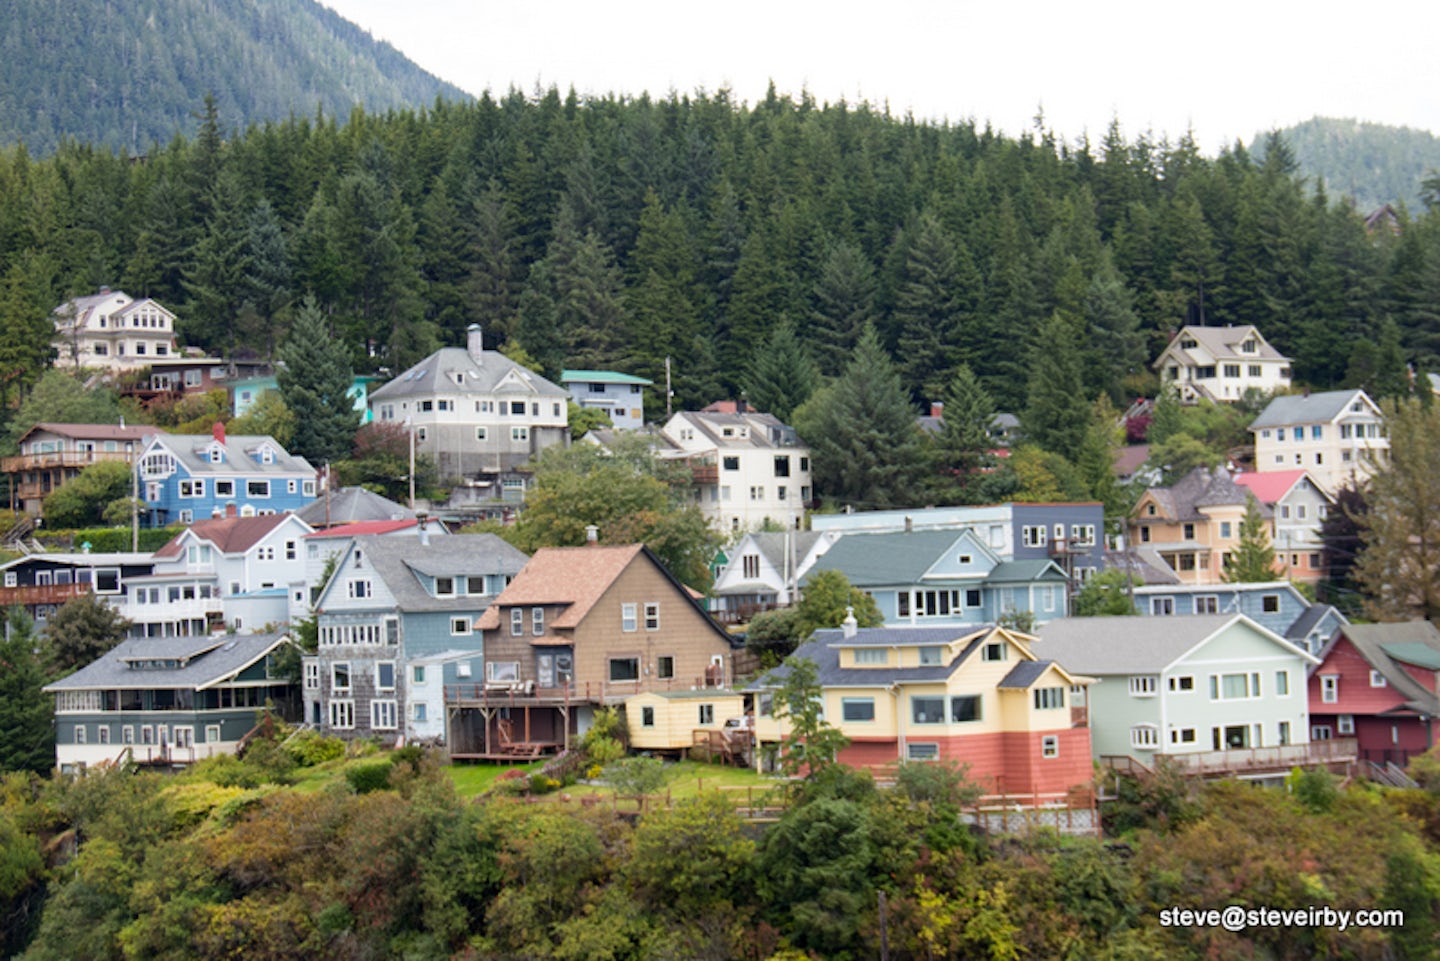 Residential area above the port in Ketchikan 9/7/18